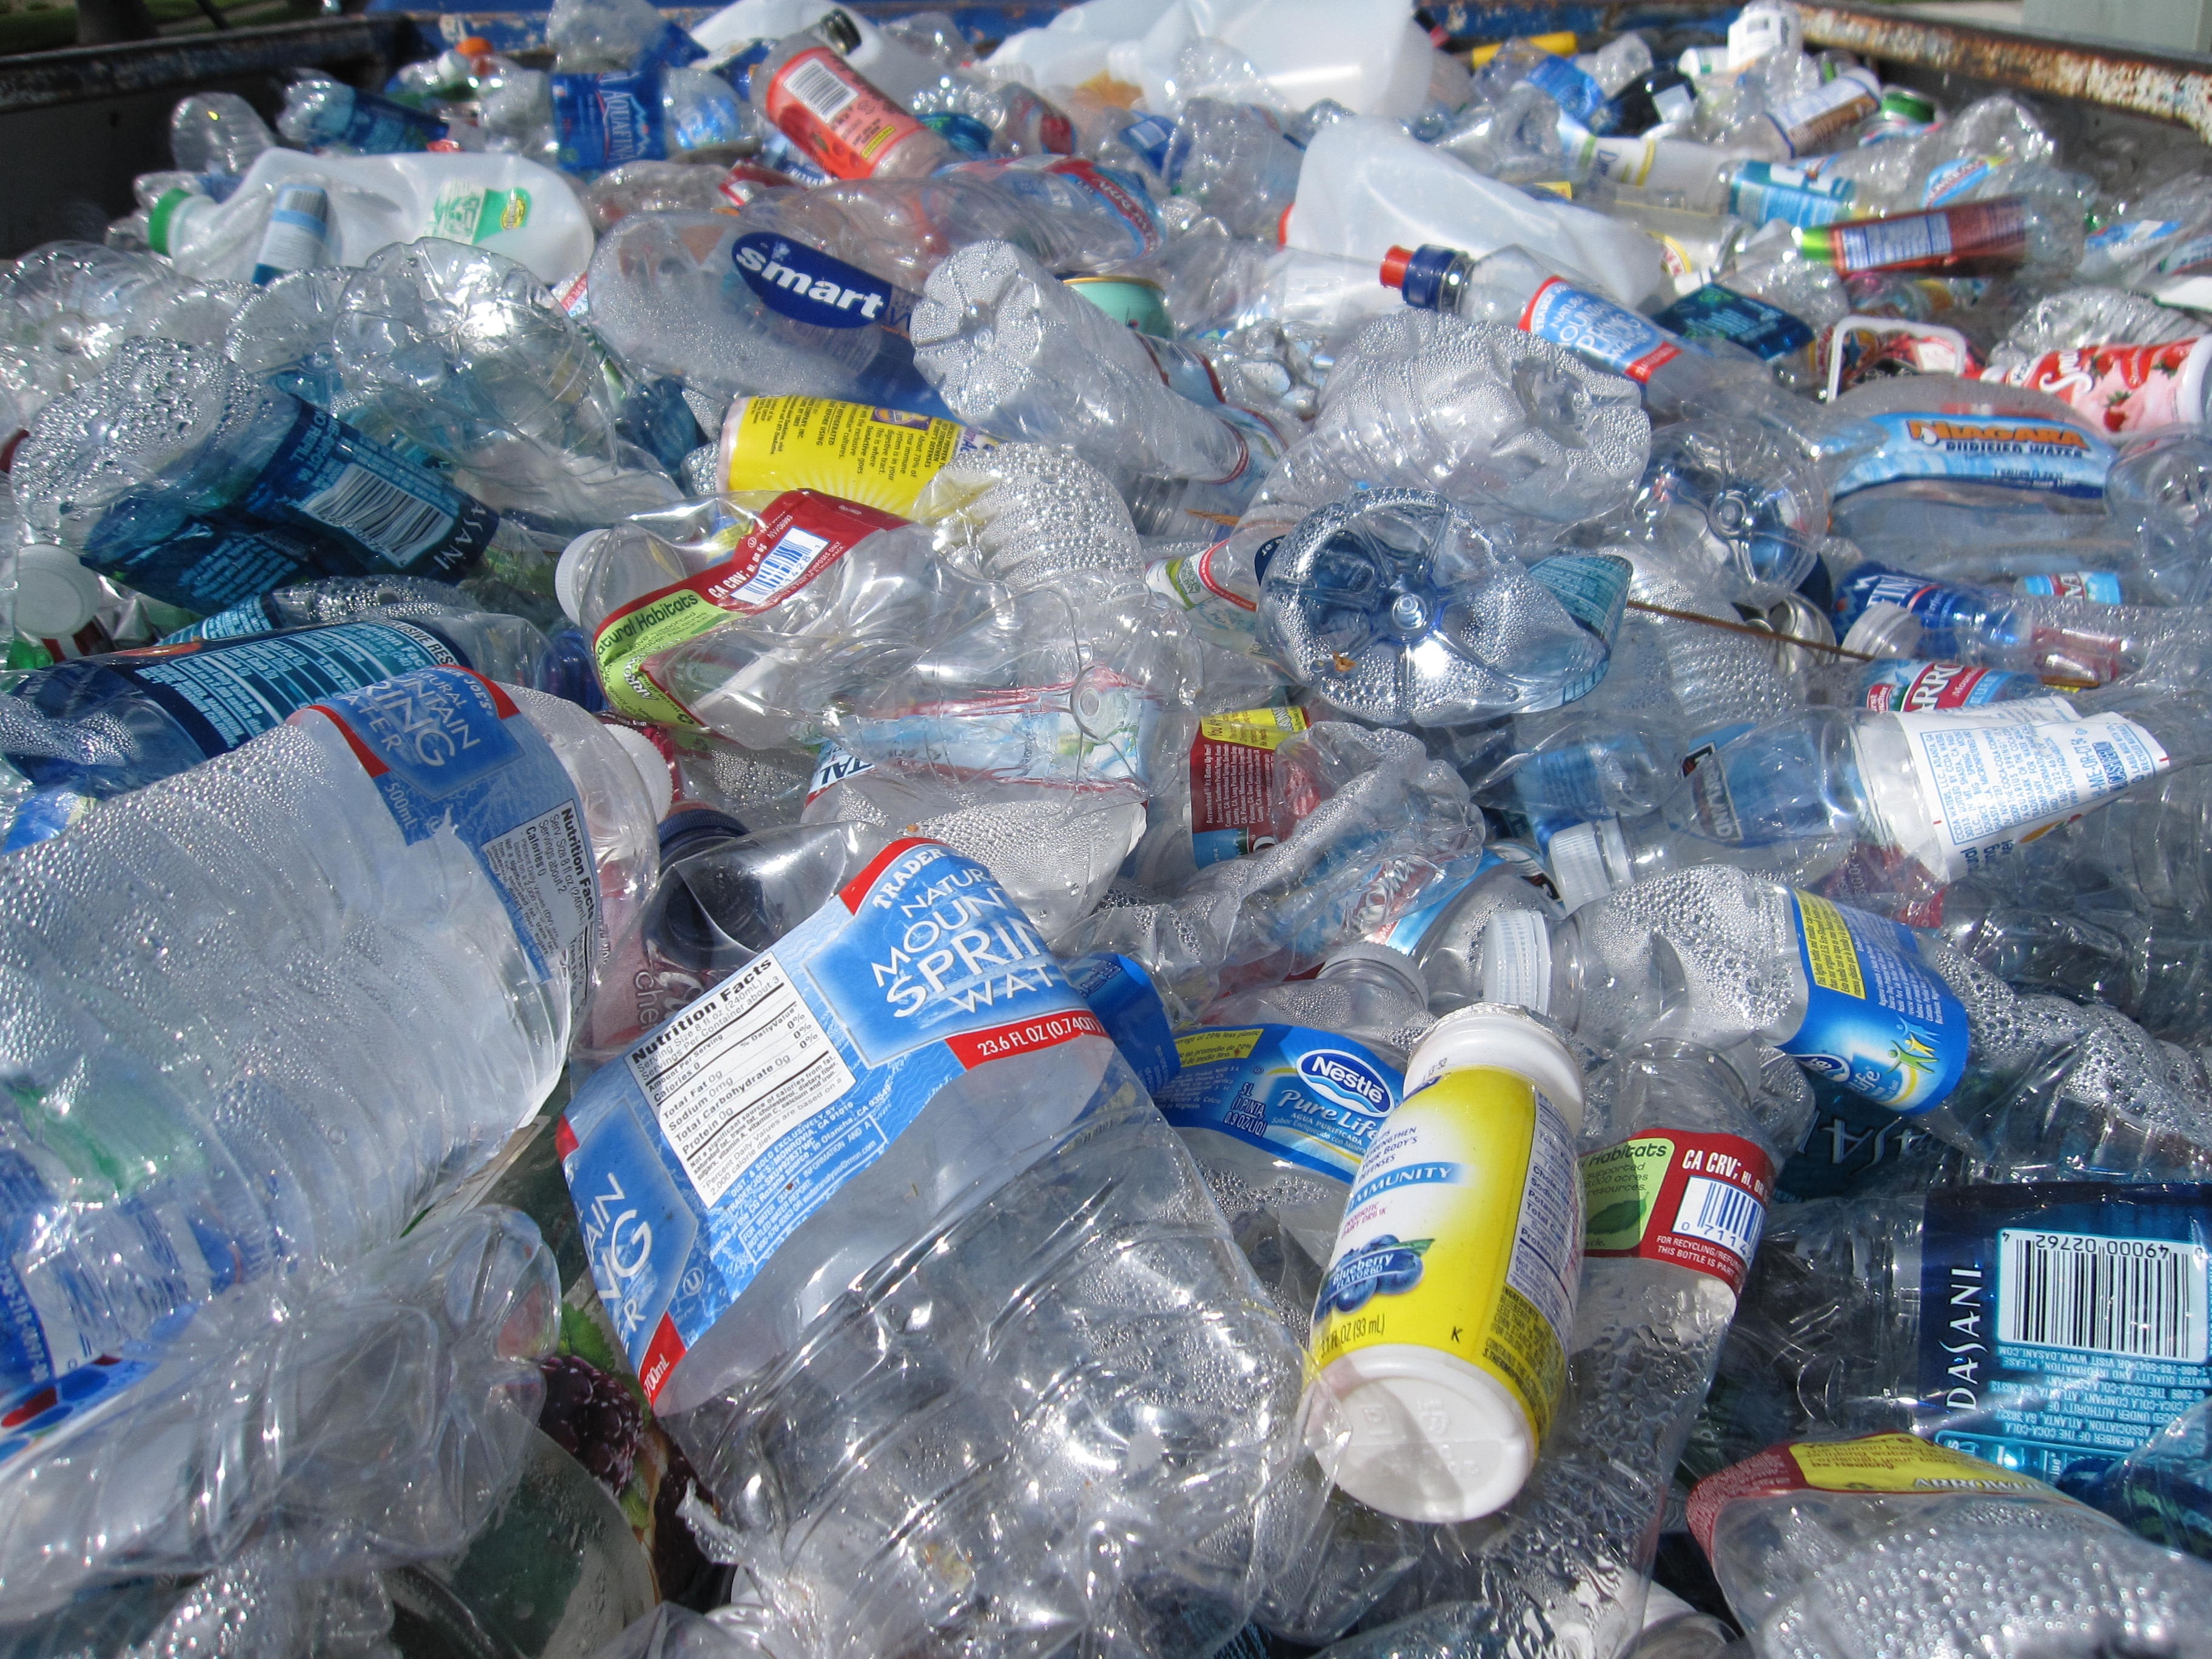 Pet Bottles Scrap Manufacturers and Suppliers India | Get contact details of Pet Bottles Scrap Manufacturers Companies at ExportersIndia.com. ExportersIndia.com is a well-known B2B Marketplace, where you can search Pet Bottles Scrap Wholesale Suppliers, Manufacturers of Pet Bottles Scrap India, Pet Bottles Scrap Exporters India, Pet Bottles Scrap Retailers Catalogs India.